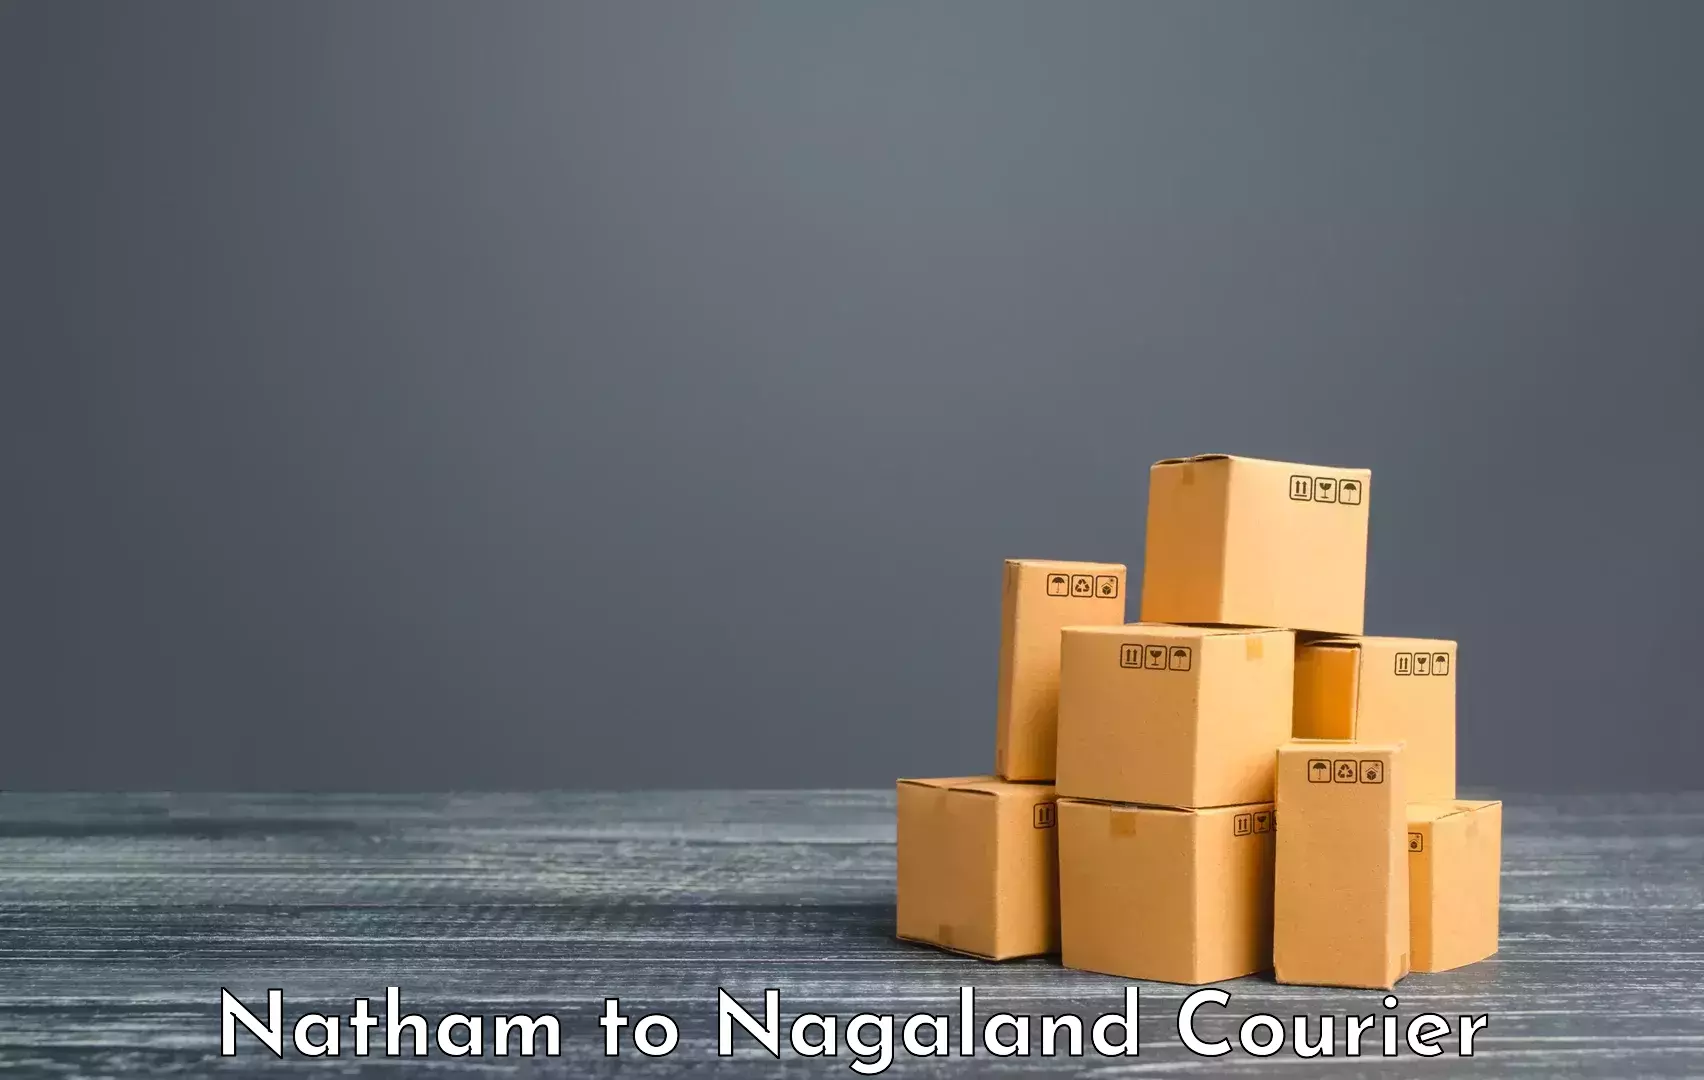 Baggage delivery technology Natham to Nagaland